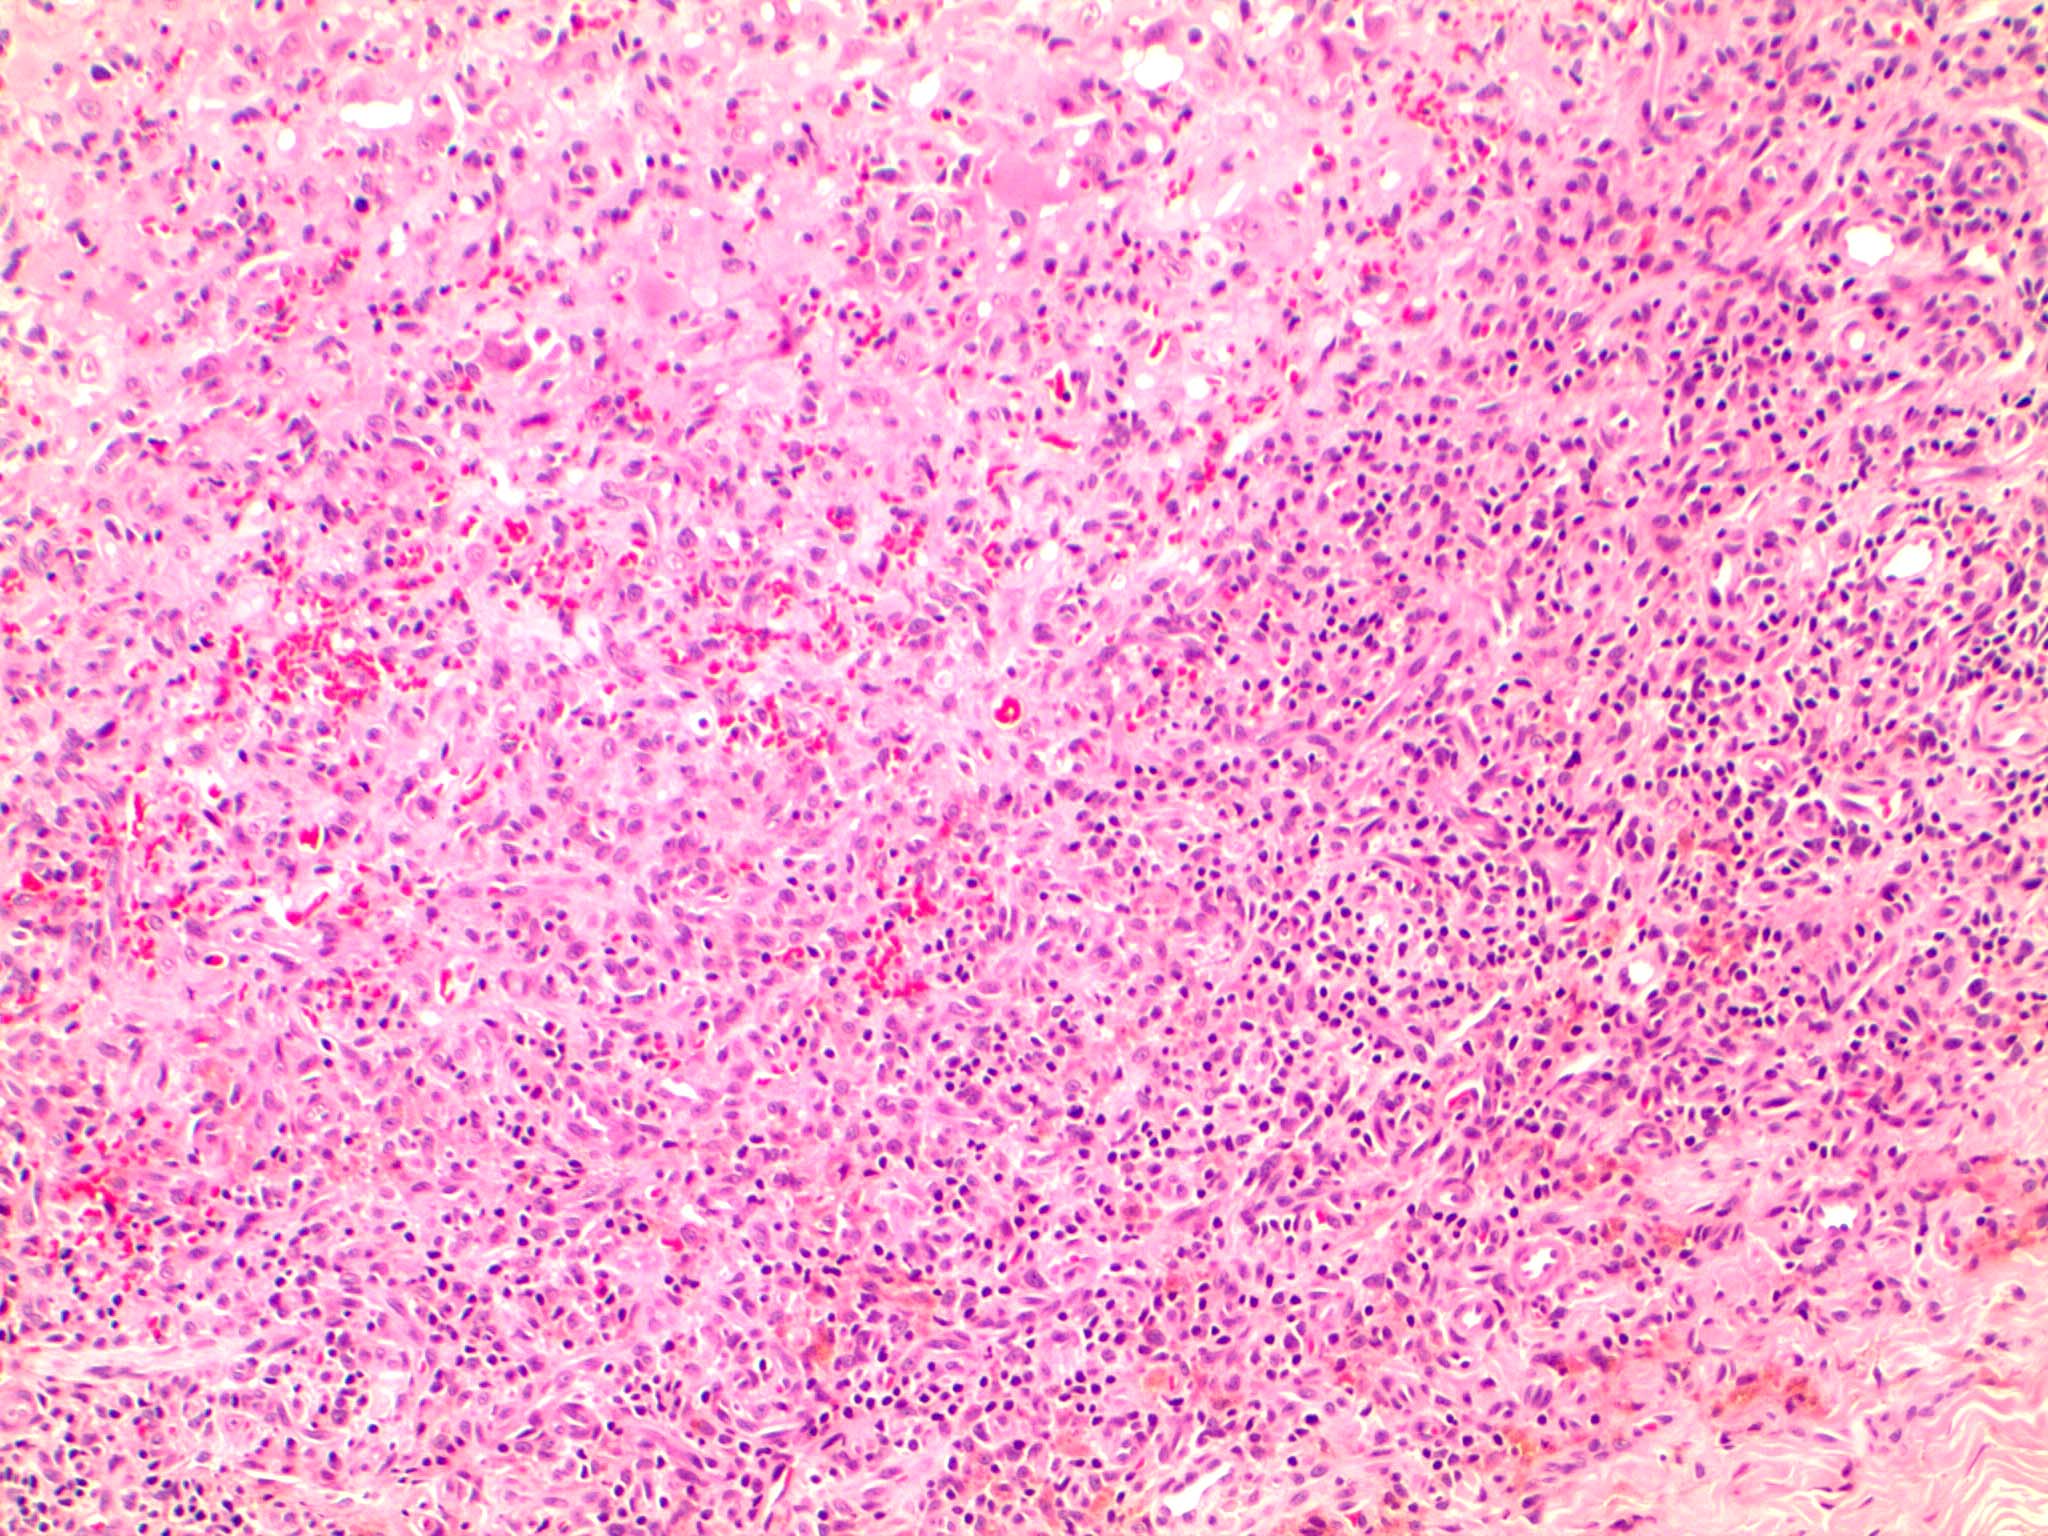 Mixed inflammation with hemosiderin deposition